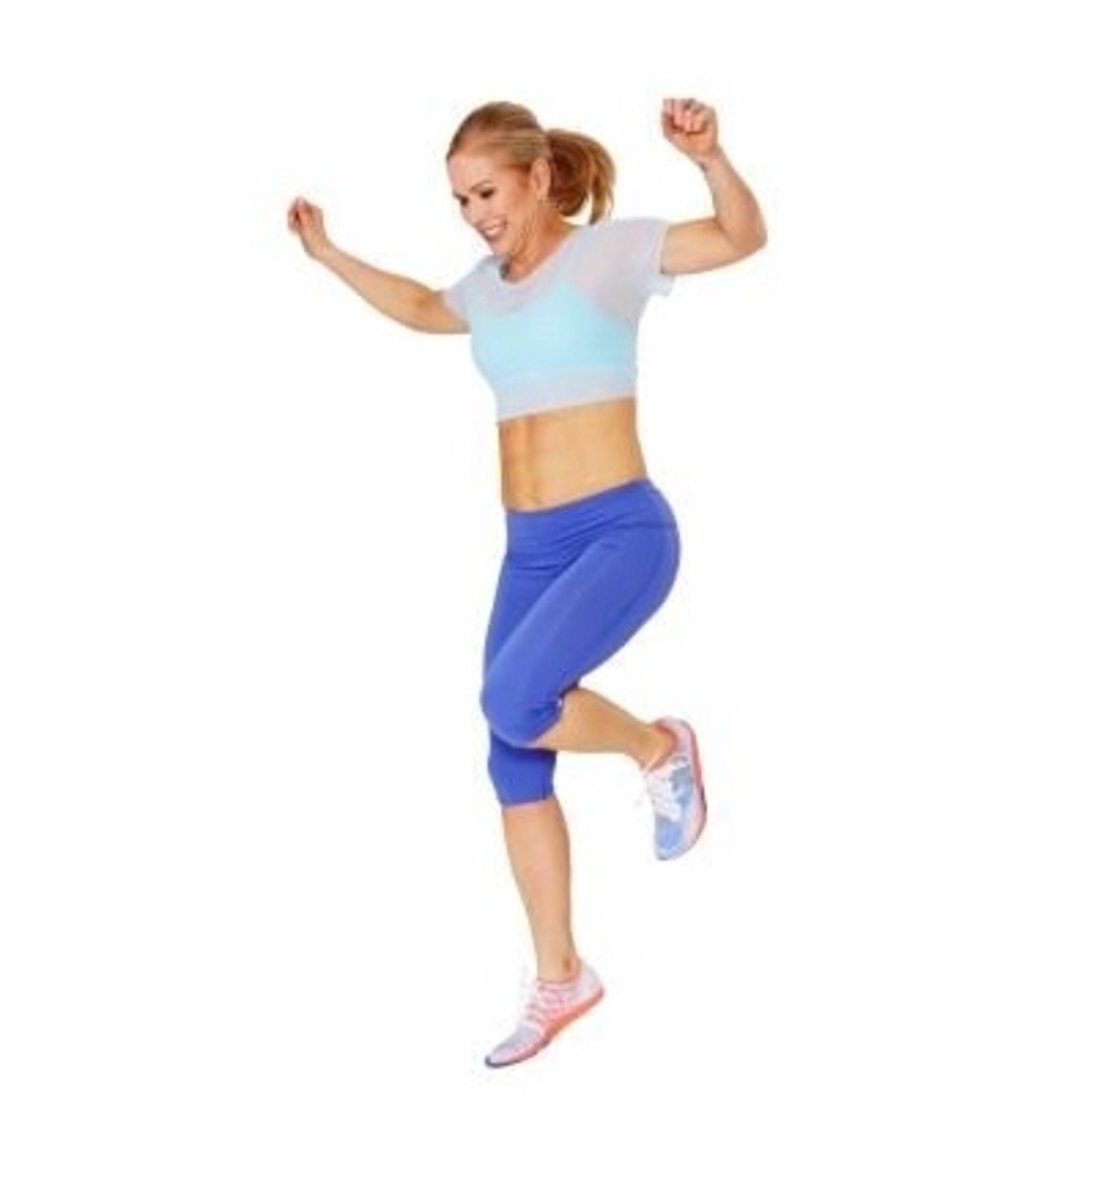 1-Leg Hops: This exercise works glutes and leg muscles while improving coordination and muscular endurance.